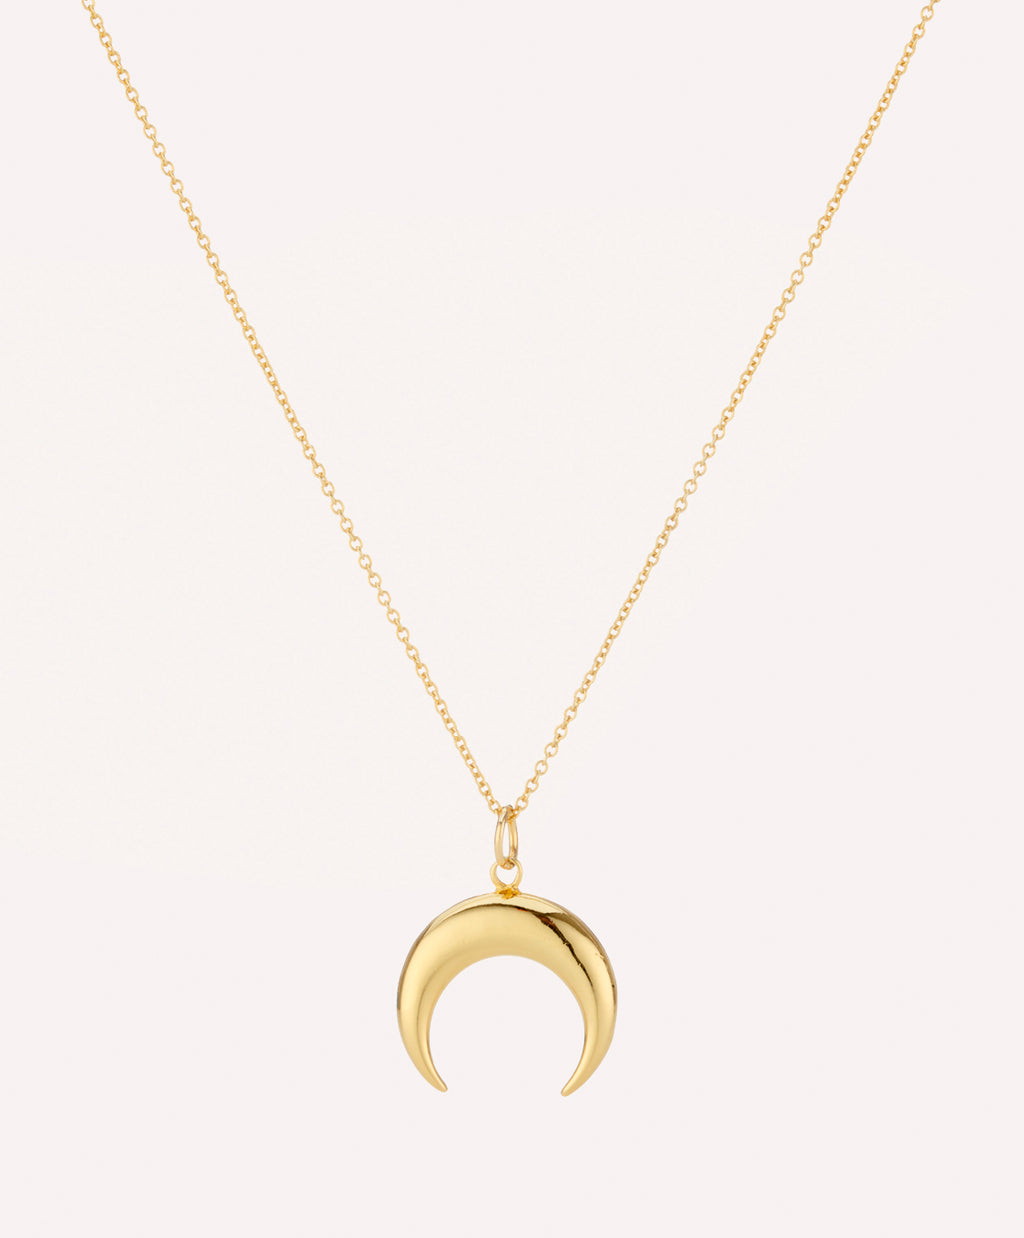 Gold plated minimalistic Crescent moon charm necklace